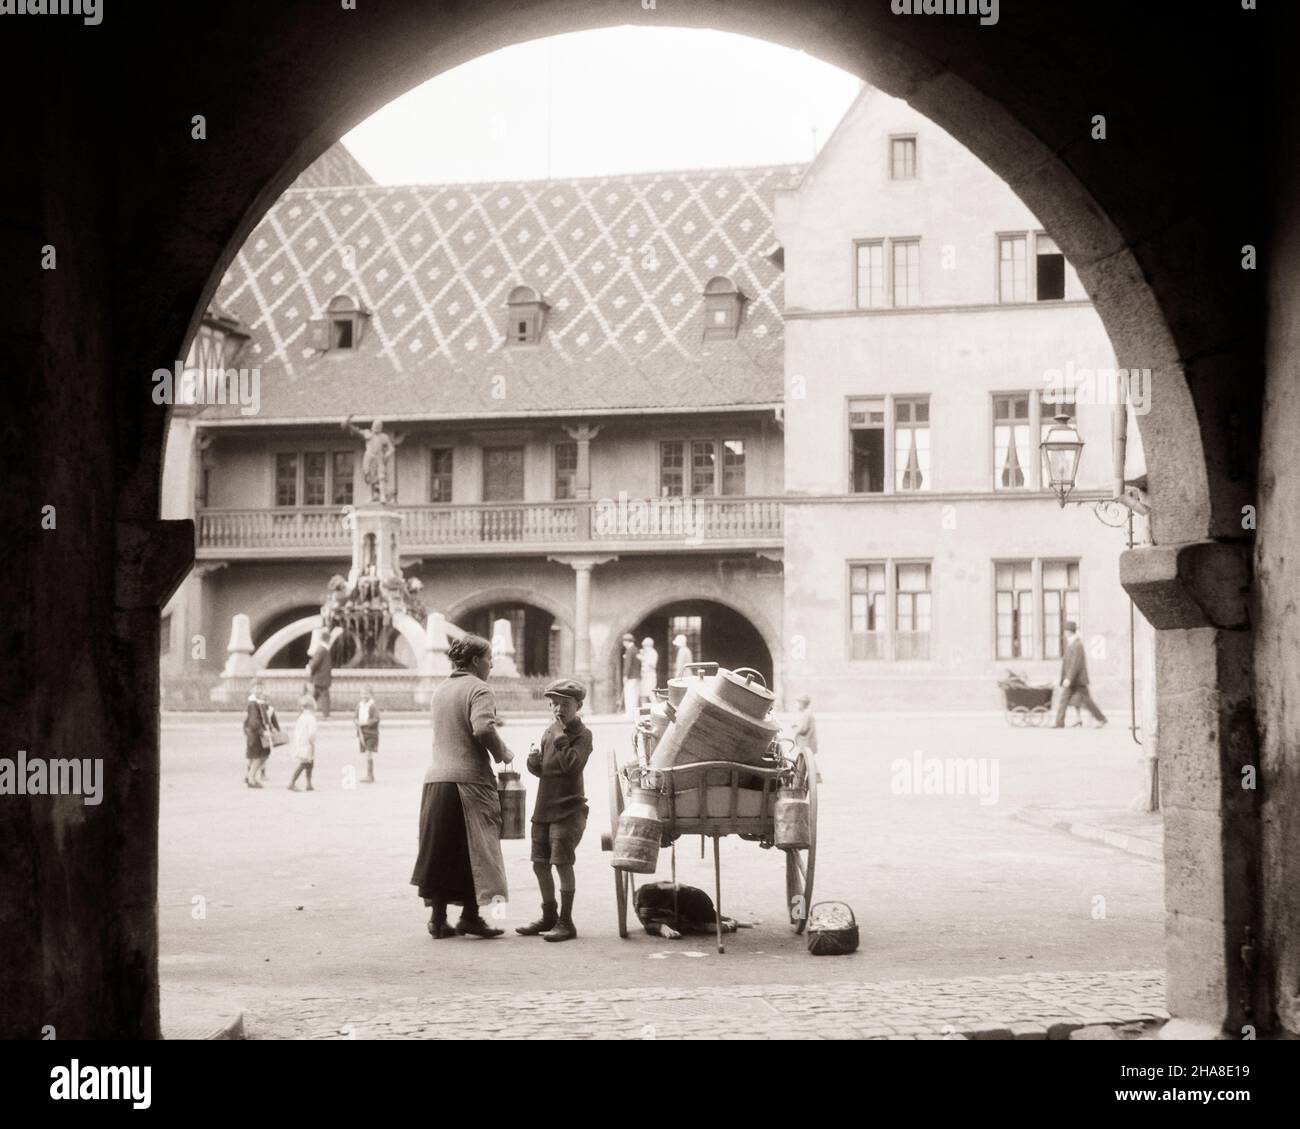 1920s 1930s WOMAN AND BOY BY MILK WAGON CART COLMAR ALSACE FRANCE WITH ANCIENNE DOUANE OLD CUSTOMS HOUSE IN BACKGROUND - r2687 HAR001 HARS DAIRY COPY SPACE FULL-LENGTH LADIES PERSONS MALES BUILDINGS EUROPE B&W STRUCTURE WELLNESS BEVERAGE EUROPEAN PROPERTY AND EXTERIOR FLUID ALSACE REAL ESTATE STRUCTURES EDIFICE CUSTOMS GROWTH JUVENILES PROTEIN BEVERAGES BLACK AND WHITE HAR001 OLD FASHIONED Stock Photo